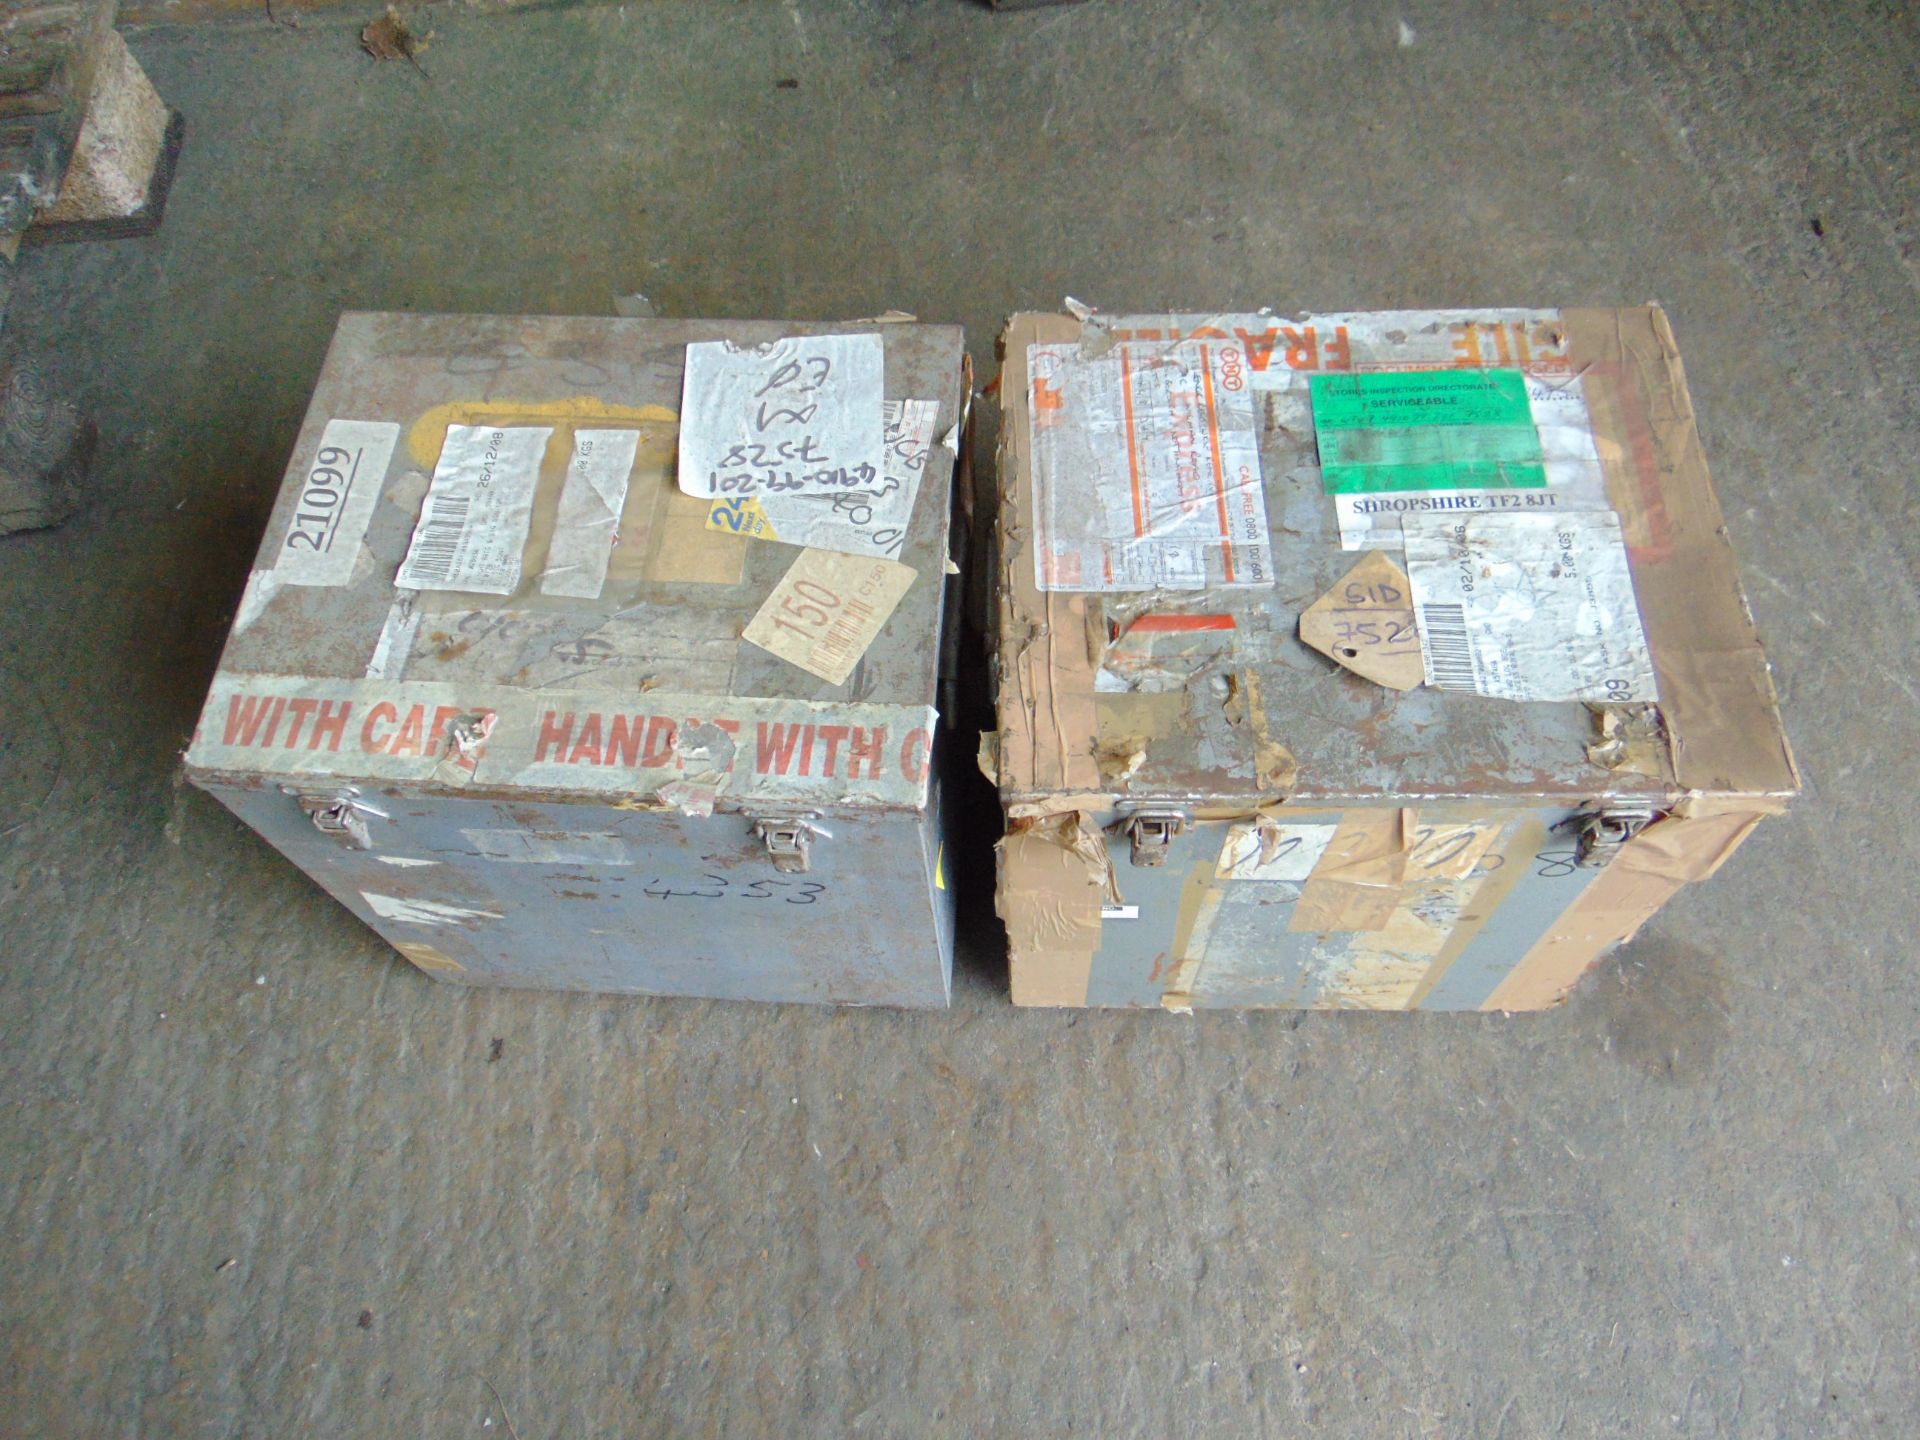 2 x CHURCHILL BRAKE EFFICIENCY RECORDERS WITH PROTECTIVE TRAVEL BOXES - Image 7 of 7